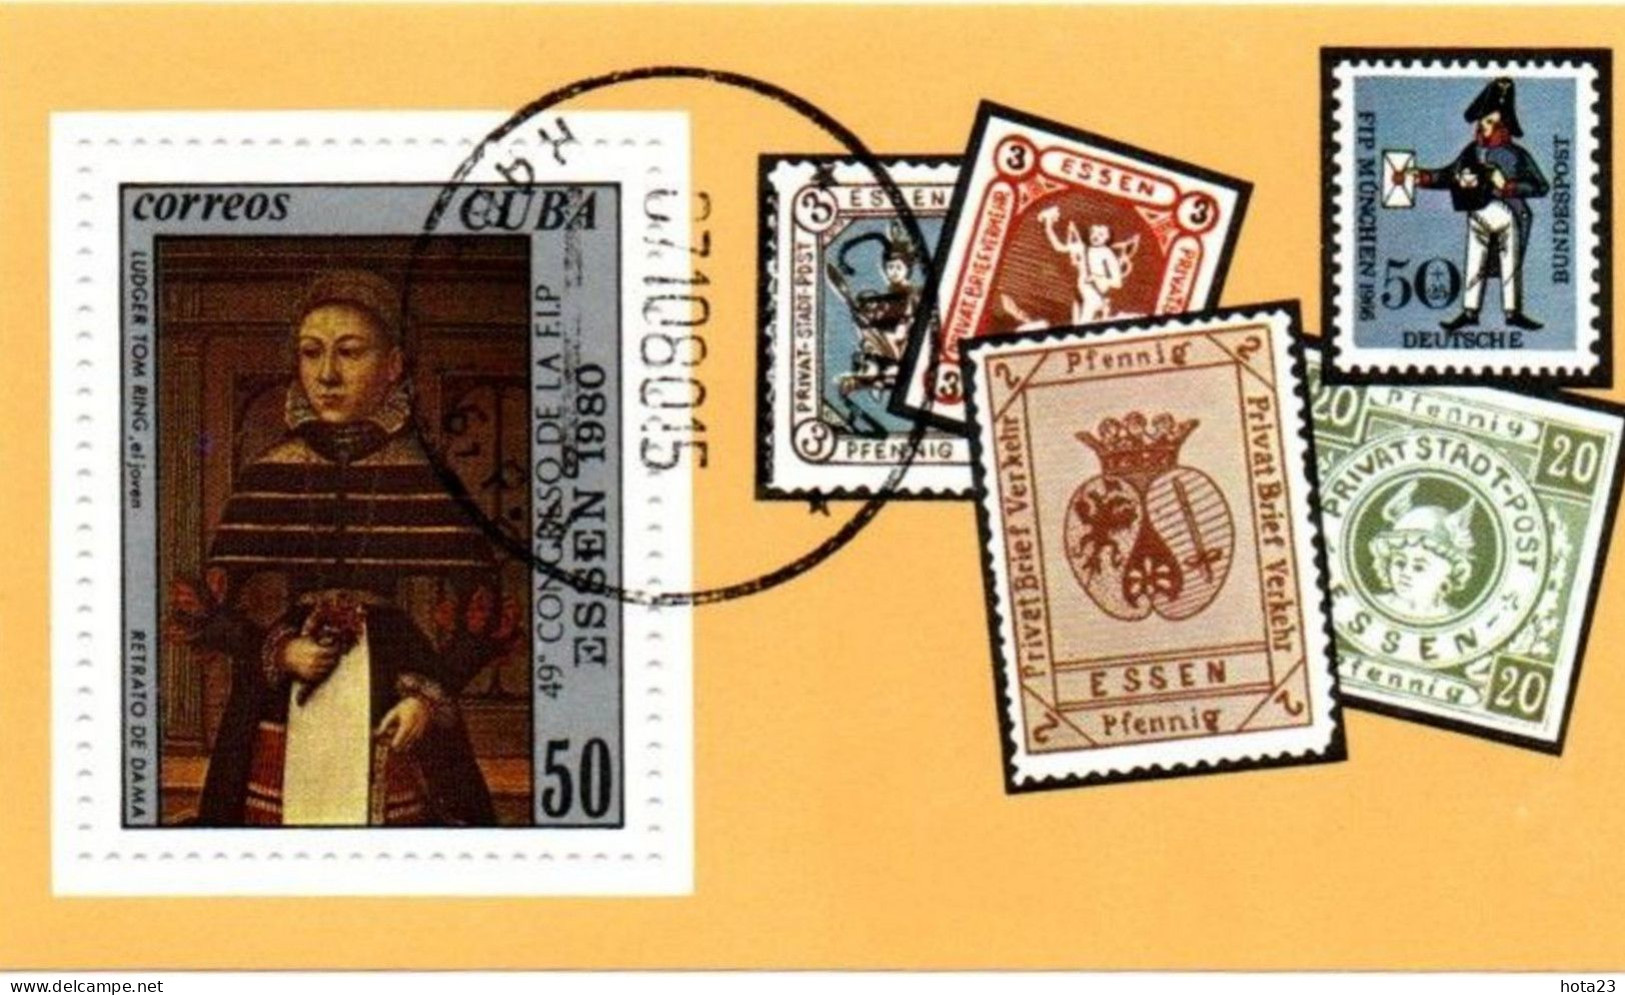 (!) CUBA 1980 STAMP ON STAMPS ESSEN - Germany 1980 EXHIBITION Painting Portrait Of A Lady, Ludger Tom Ring MI BL 64 - Usati